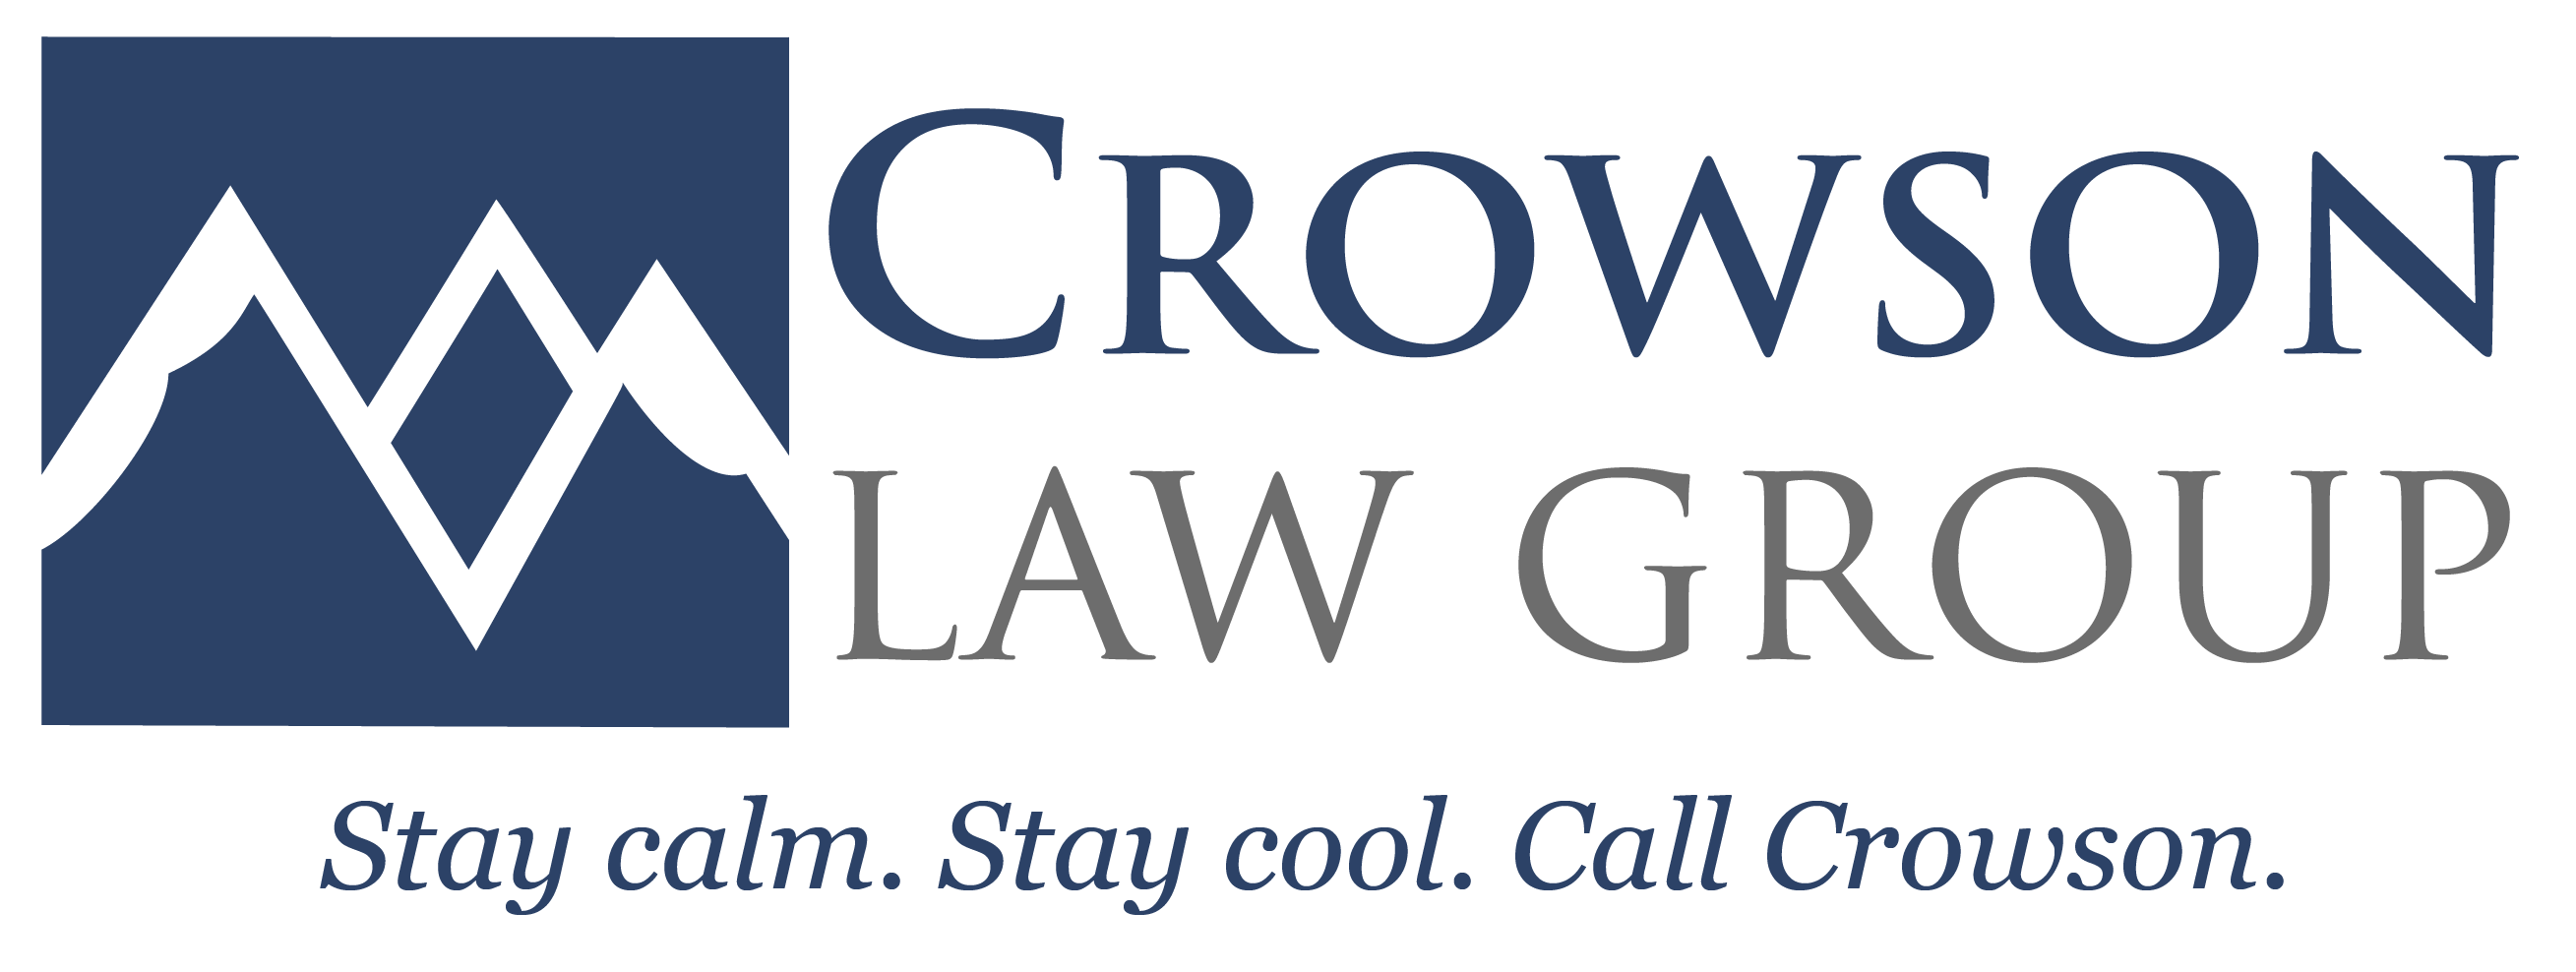 Crowson Law Group (Tier 3)